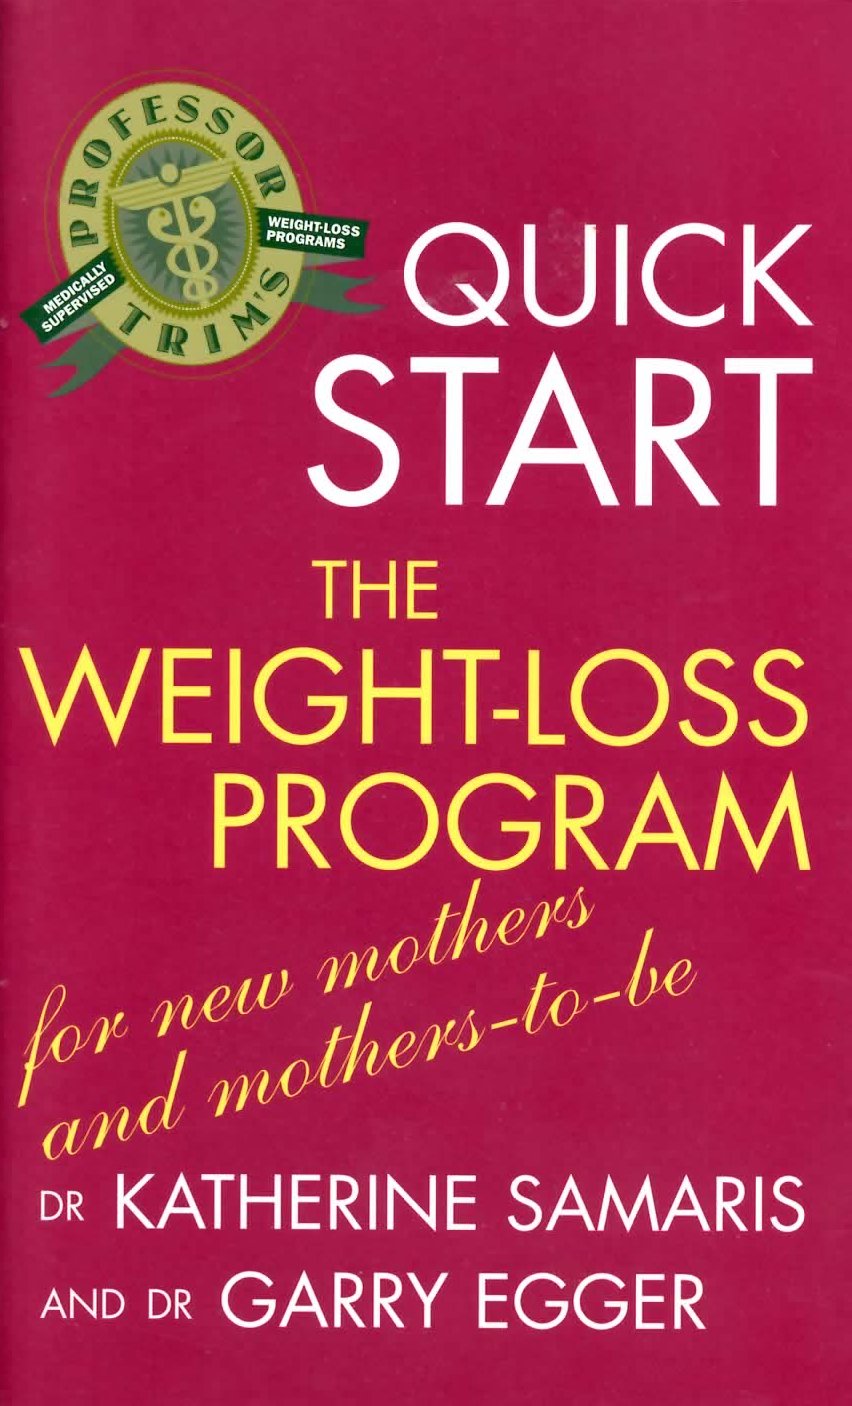 Download this Quick Start The Weight... picture